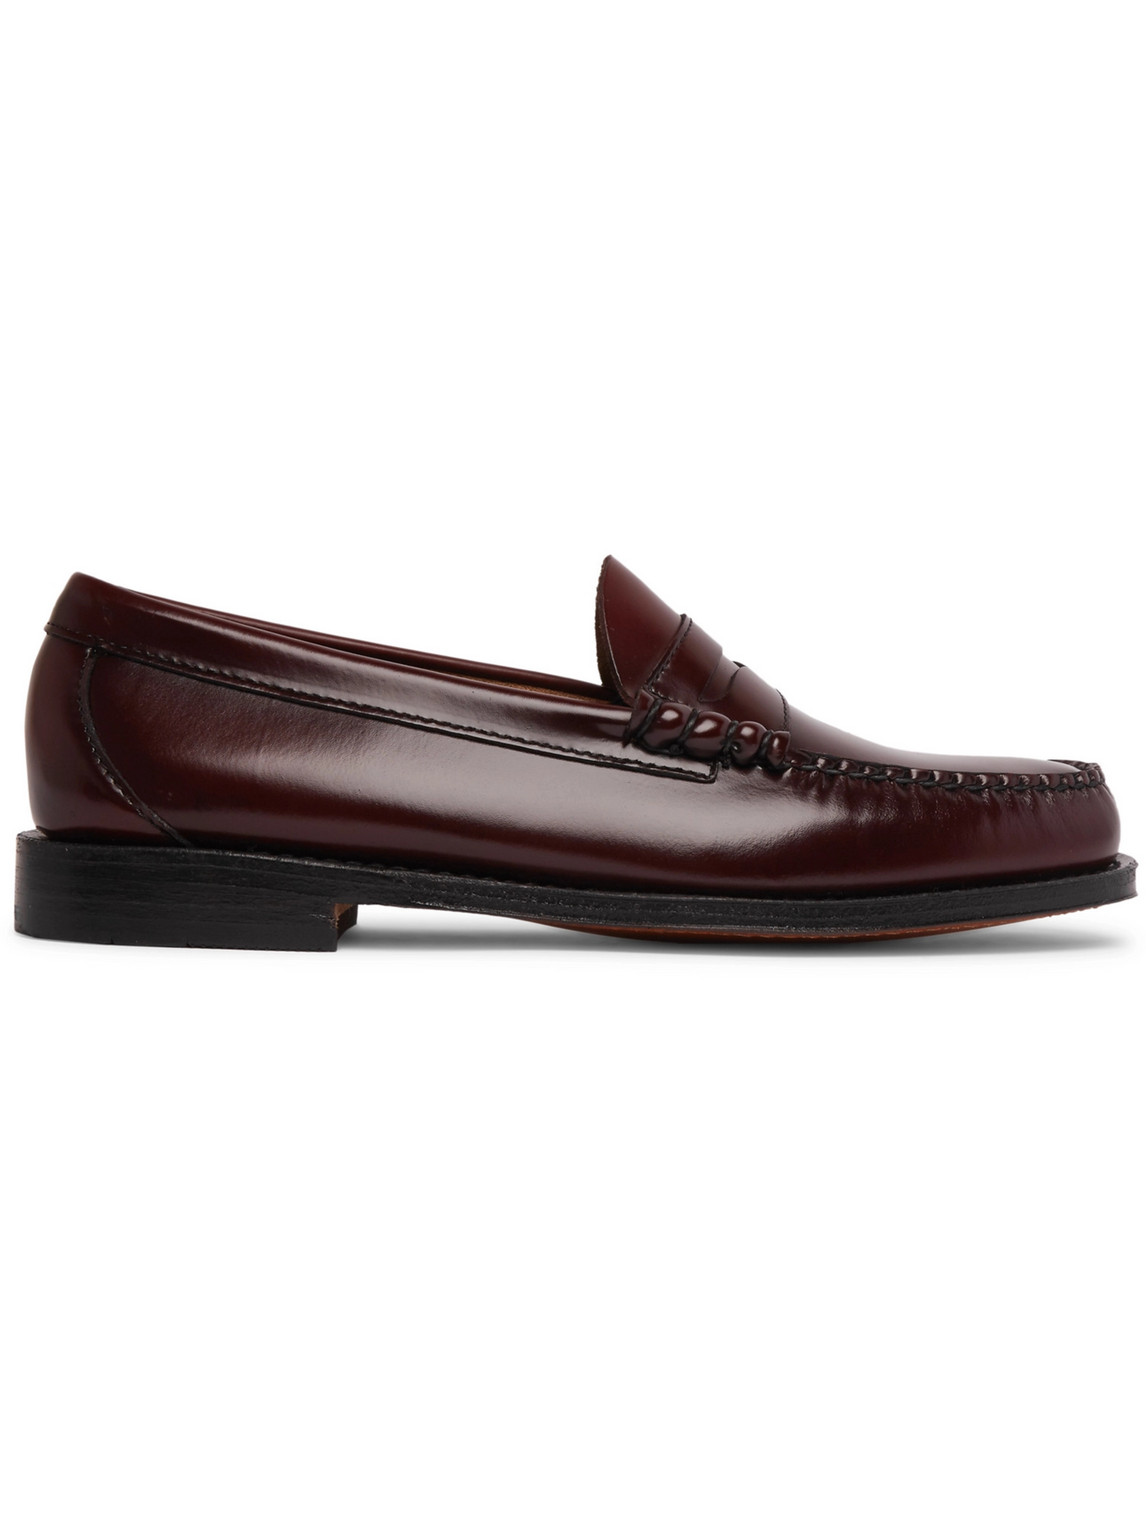 G.H. Bass & Co. - Weejuns Heritage Larson Leather Penny Loafers - Men - Burgundy - UK 8 von G.H. Bass & Co.